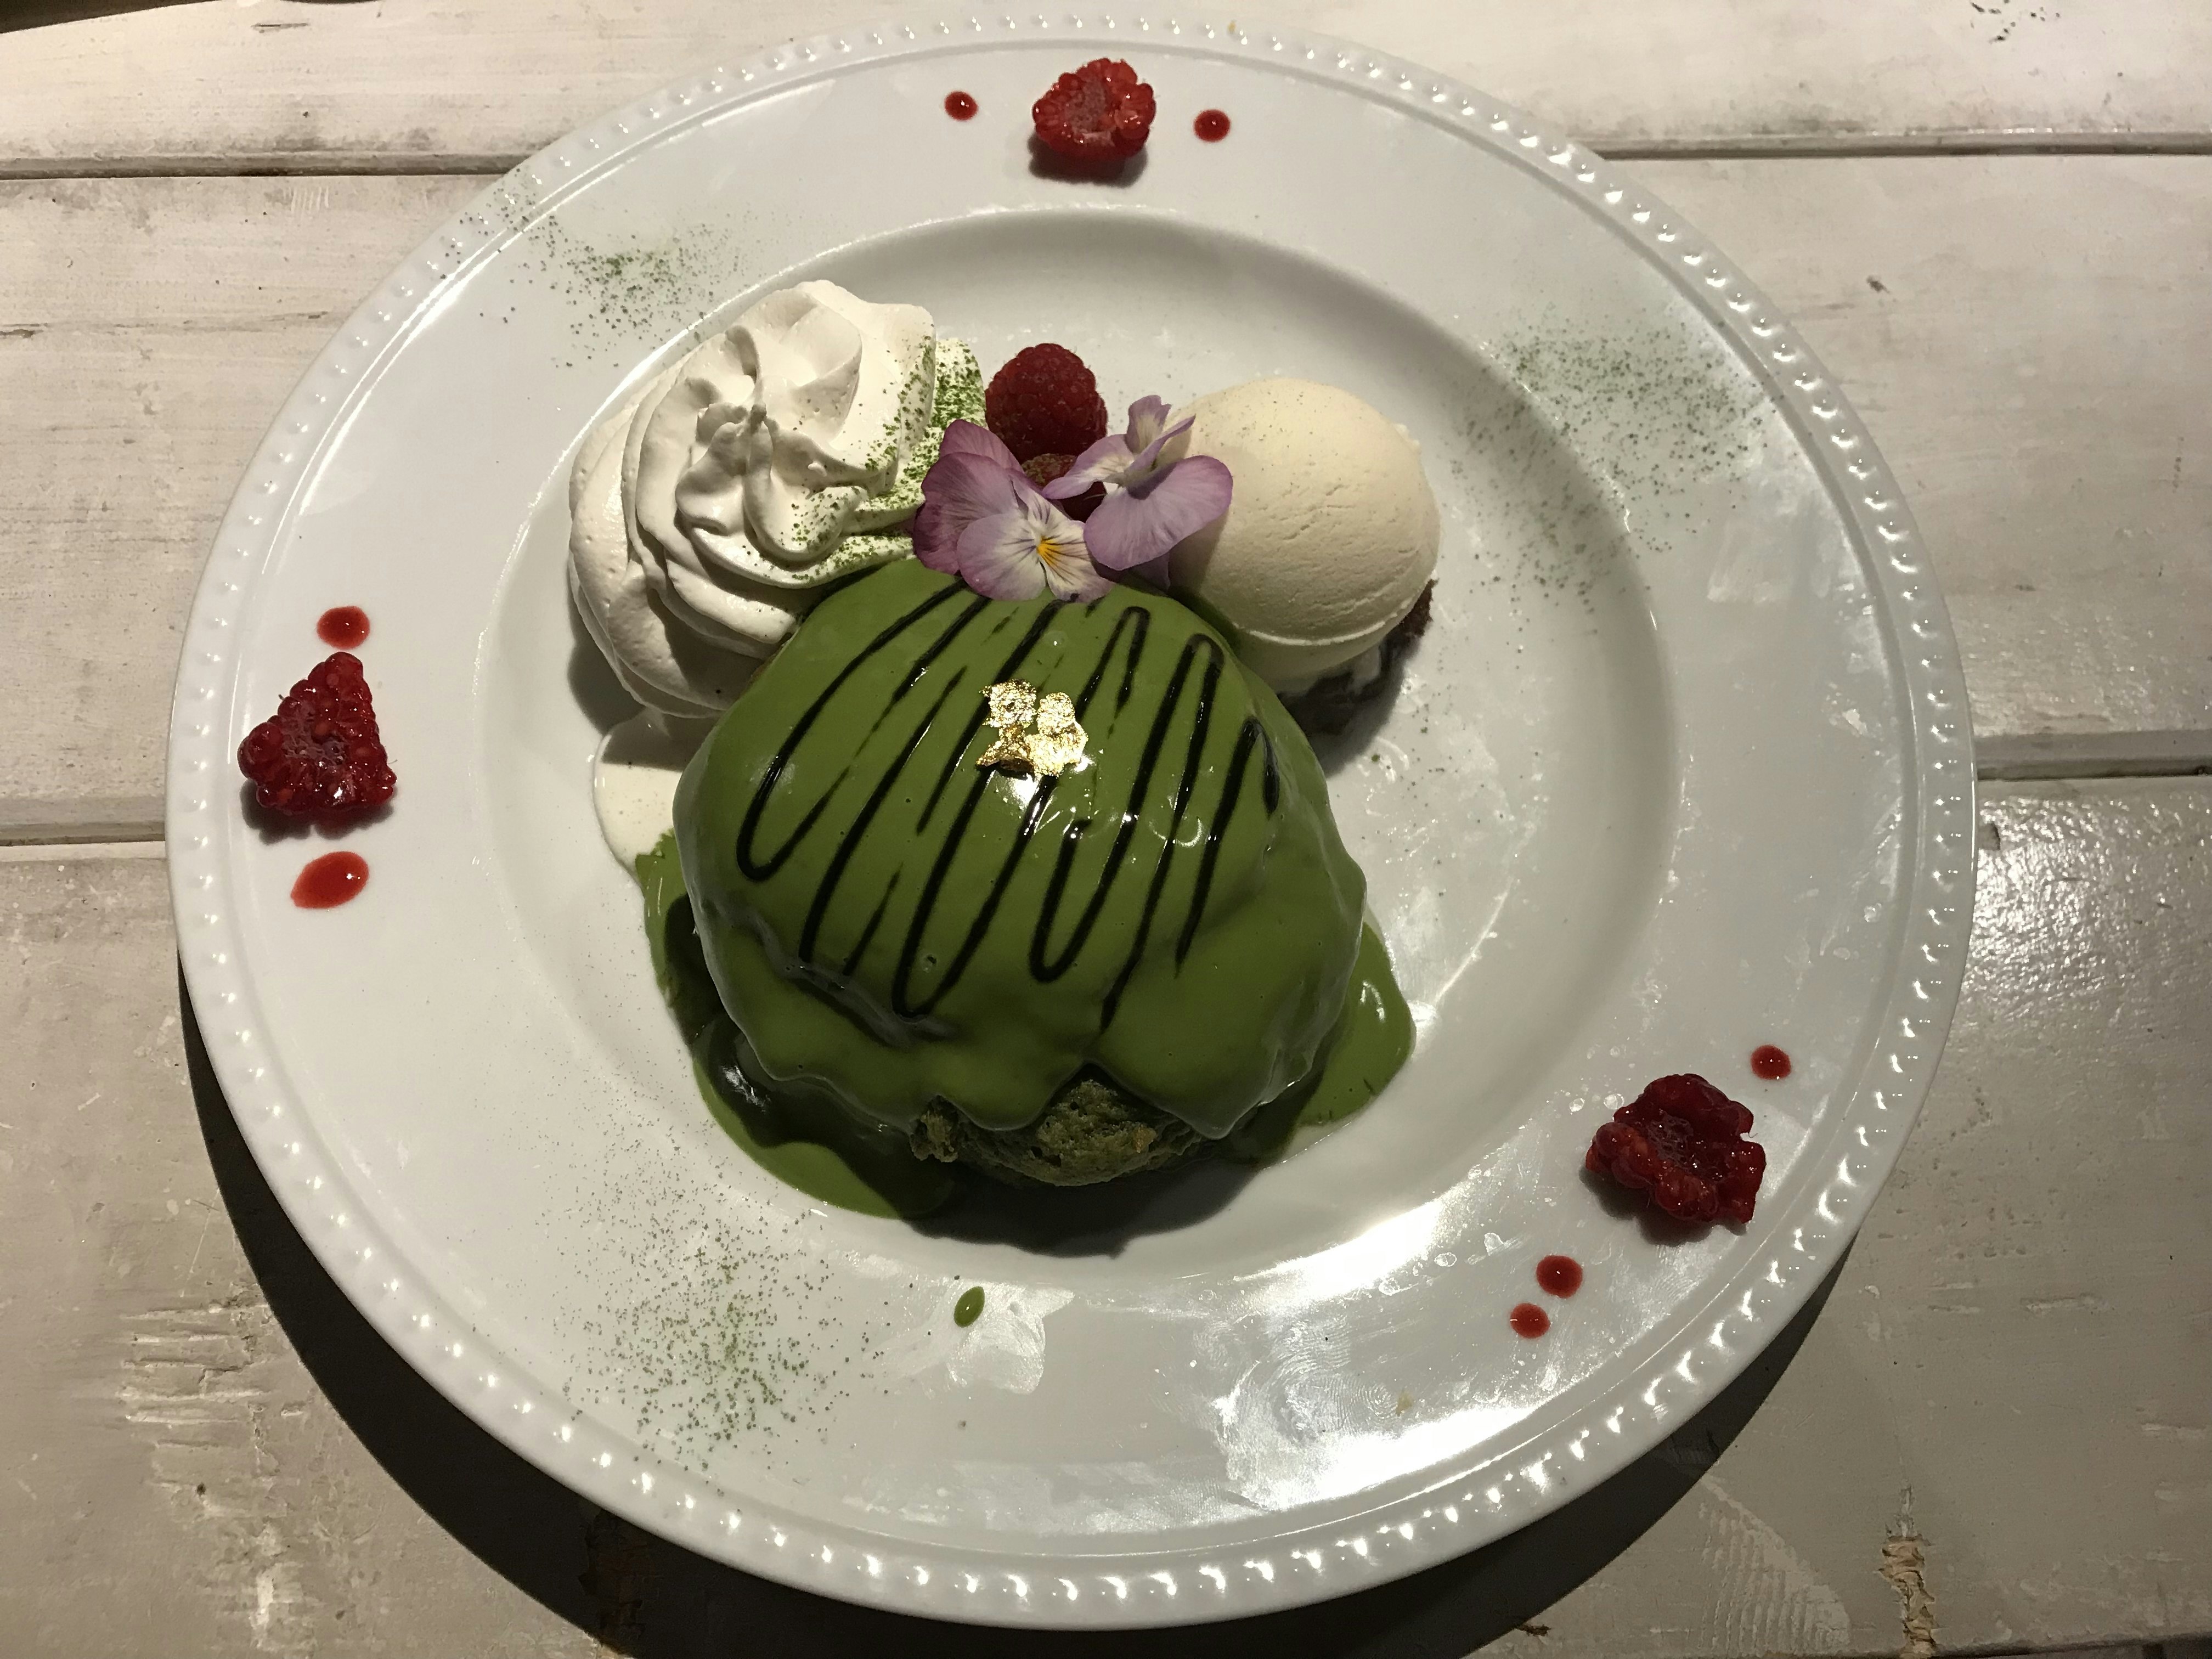 A delicately presented plate of matcha pancakes, covered in a a green sauce, alongside a rosette of whipped cream and a scoop of ice cream at Ain Soph Journey, Kyoto.